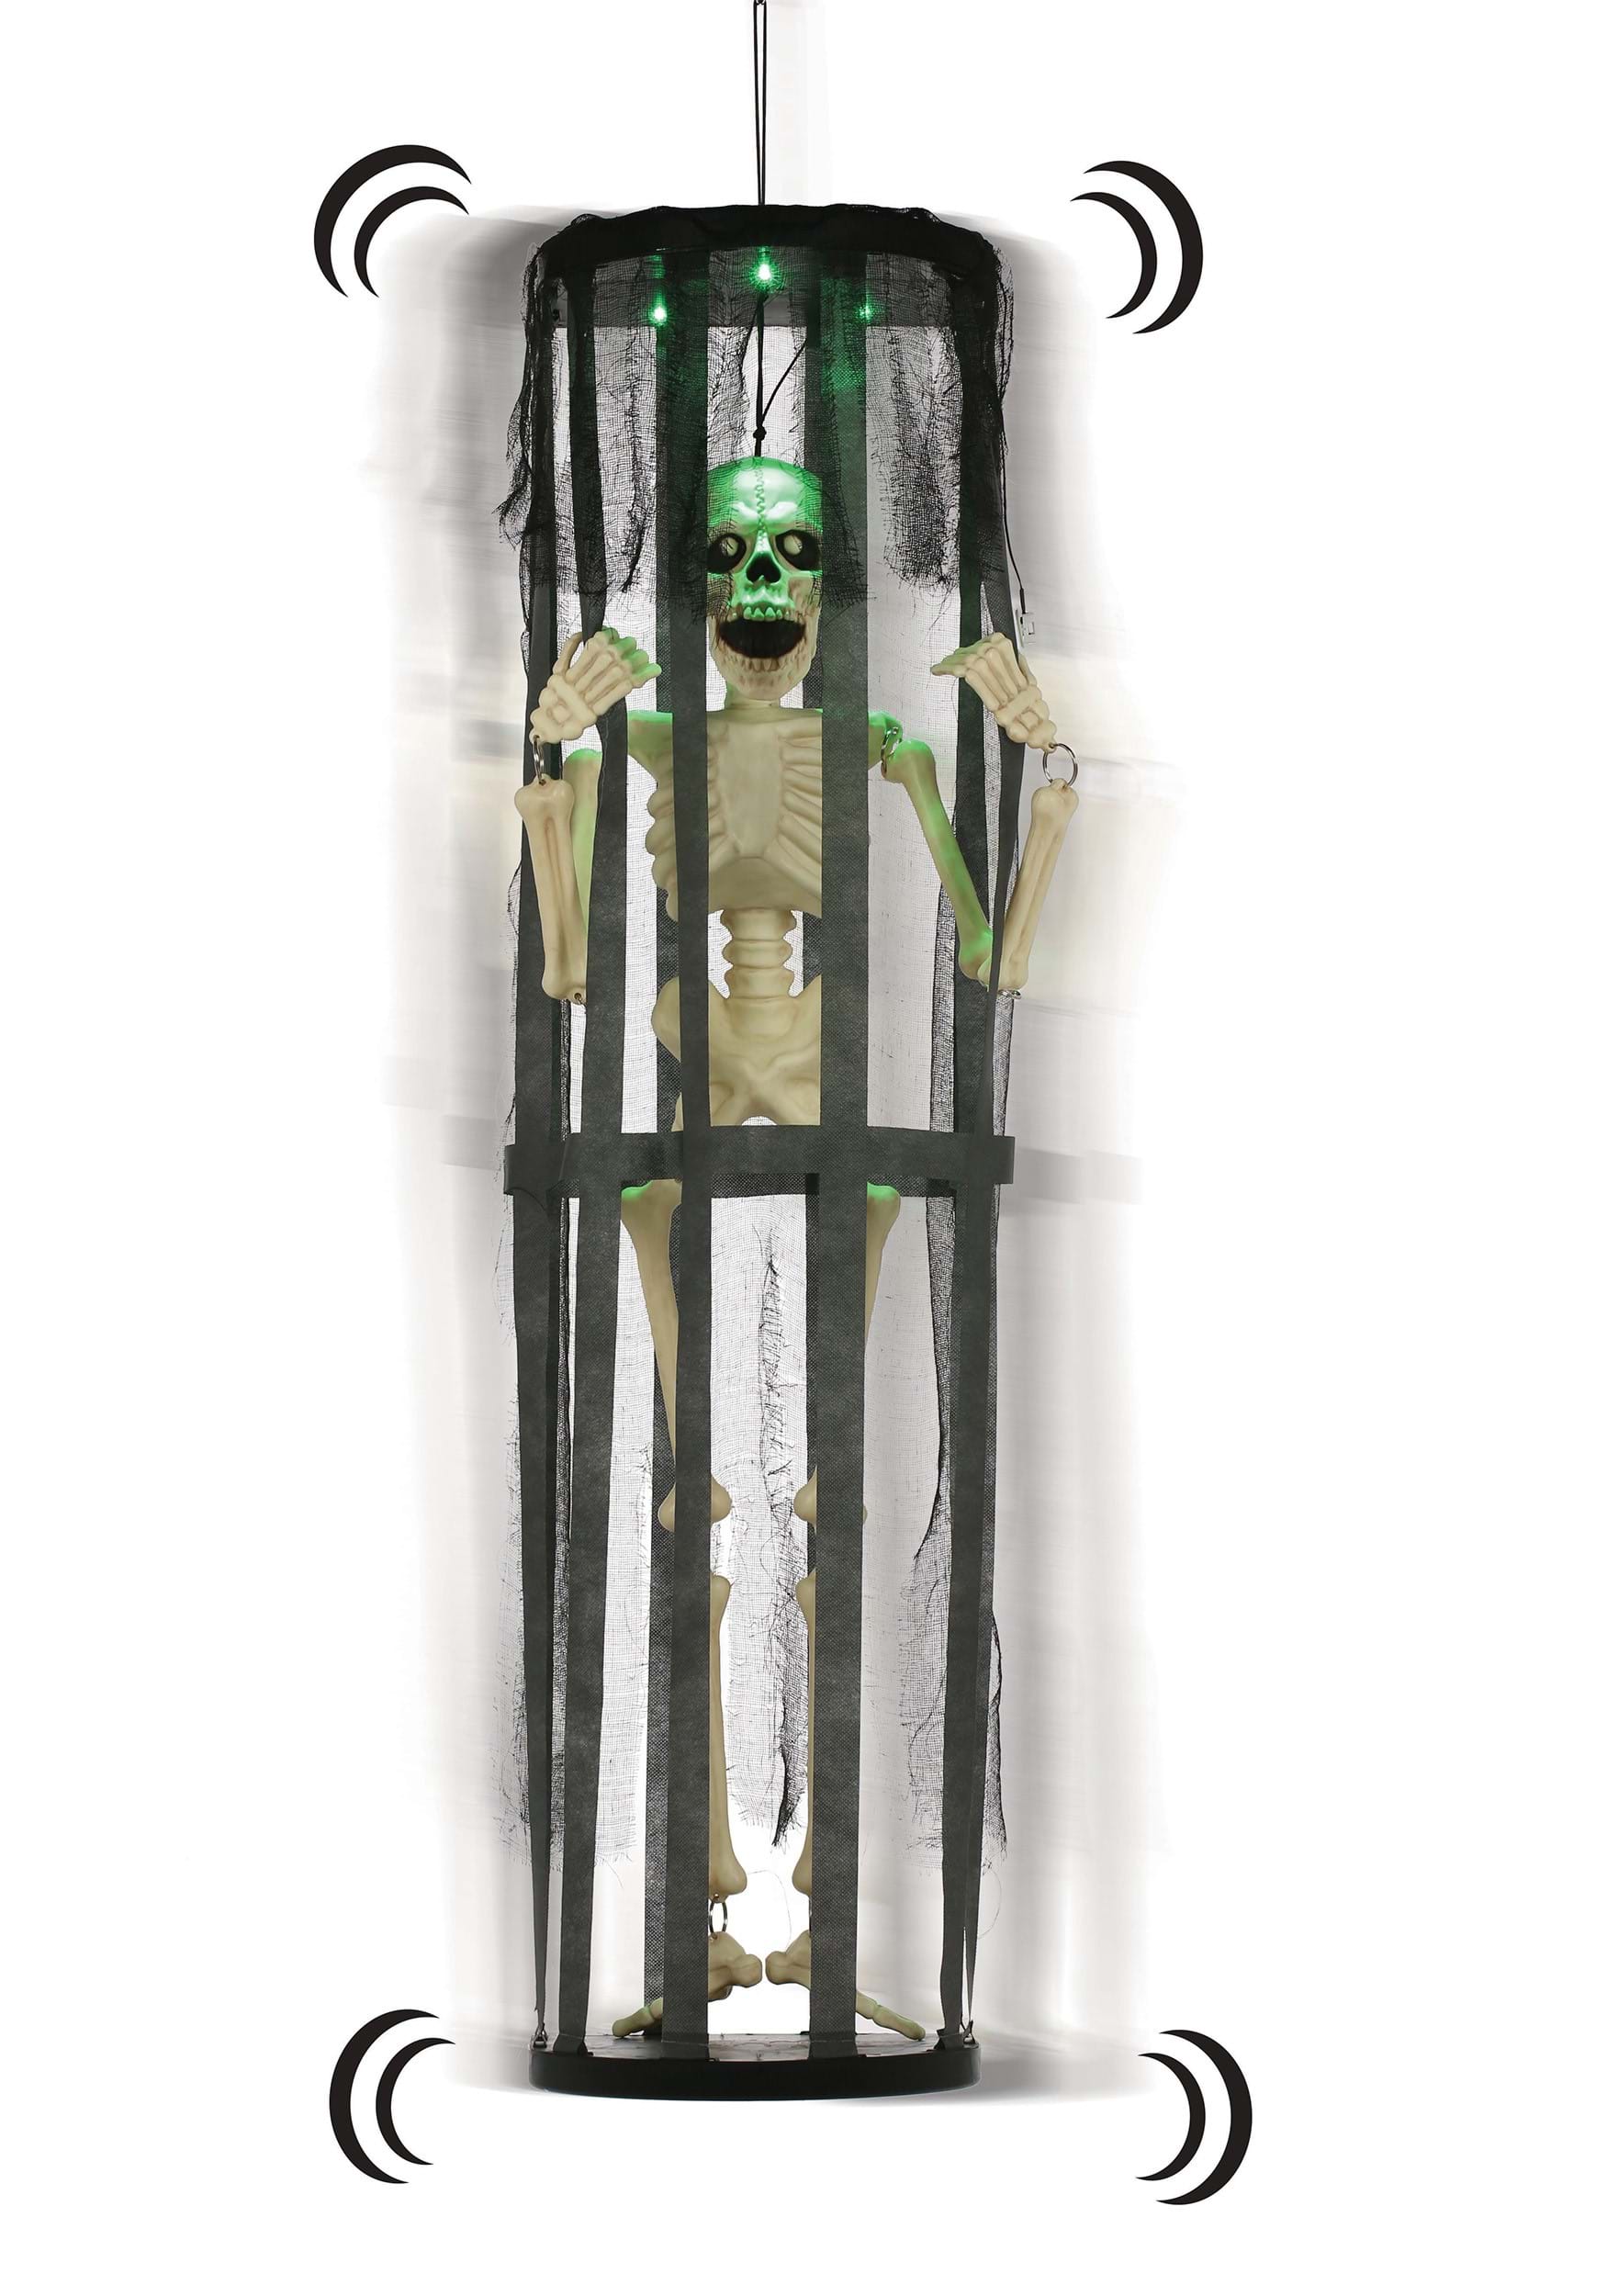 40 LED & Sound Activated Shaking Skeleton In Cage Halloween Prop